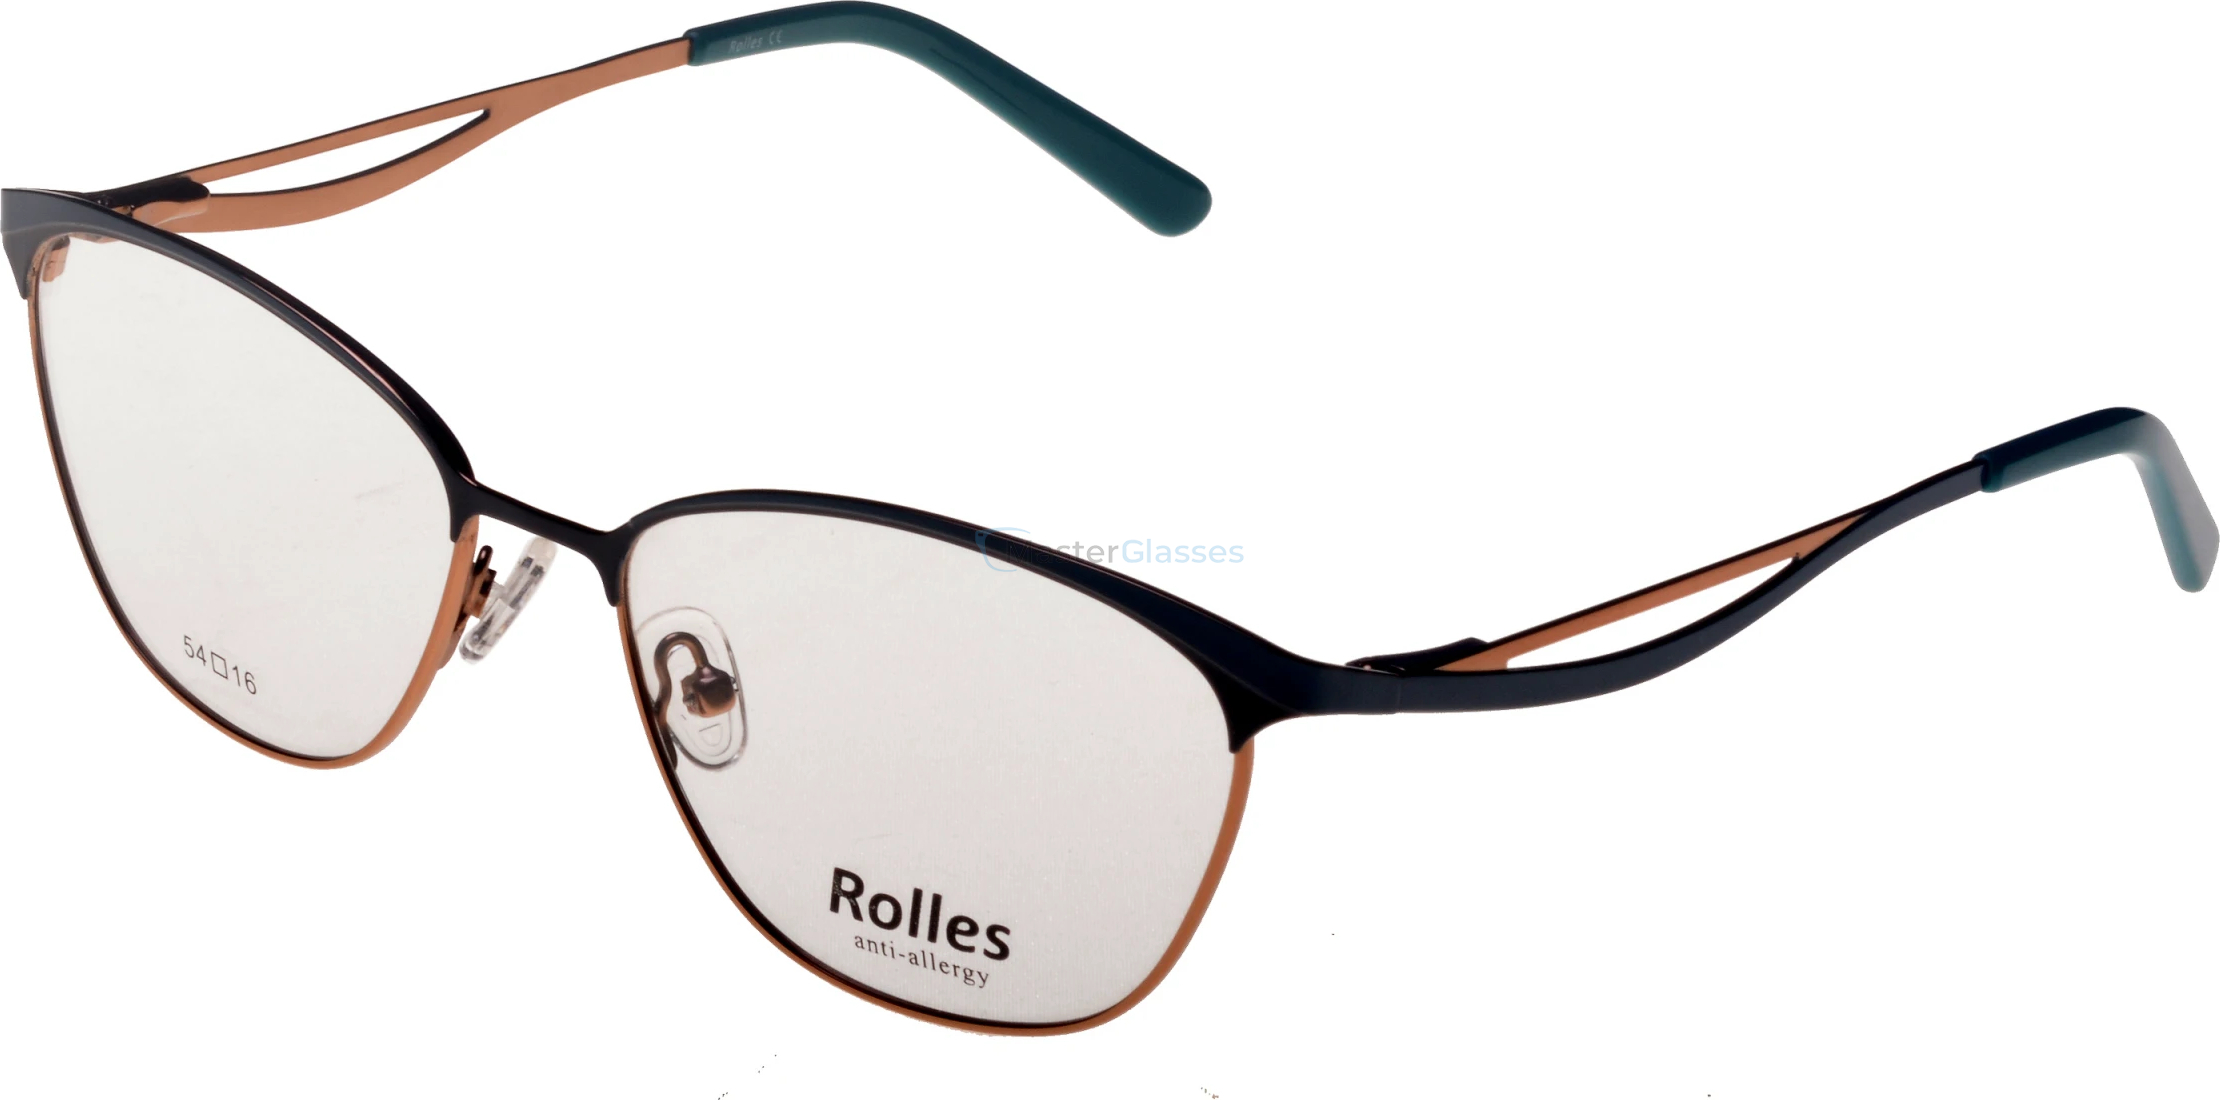  Rolles 684 01